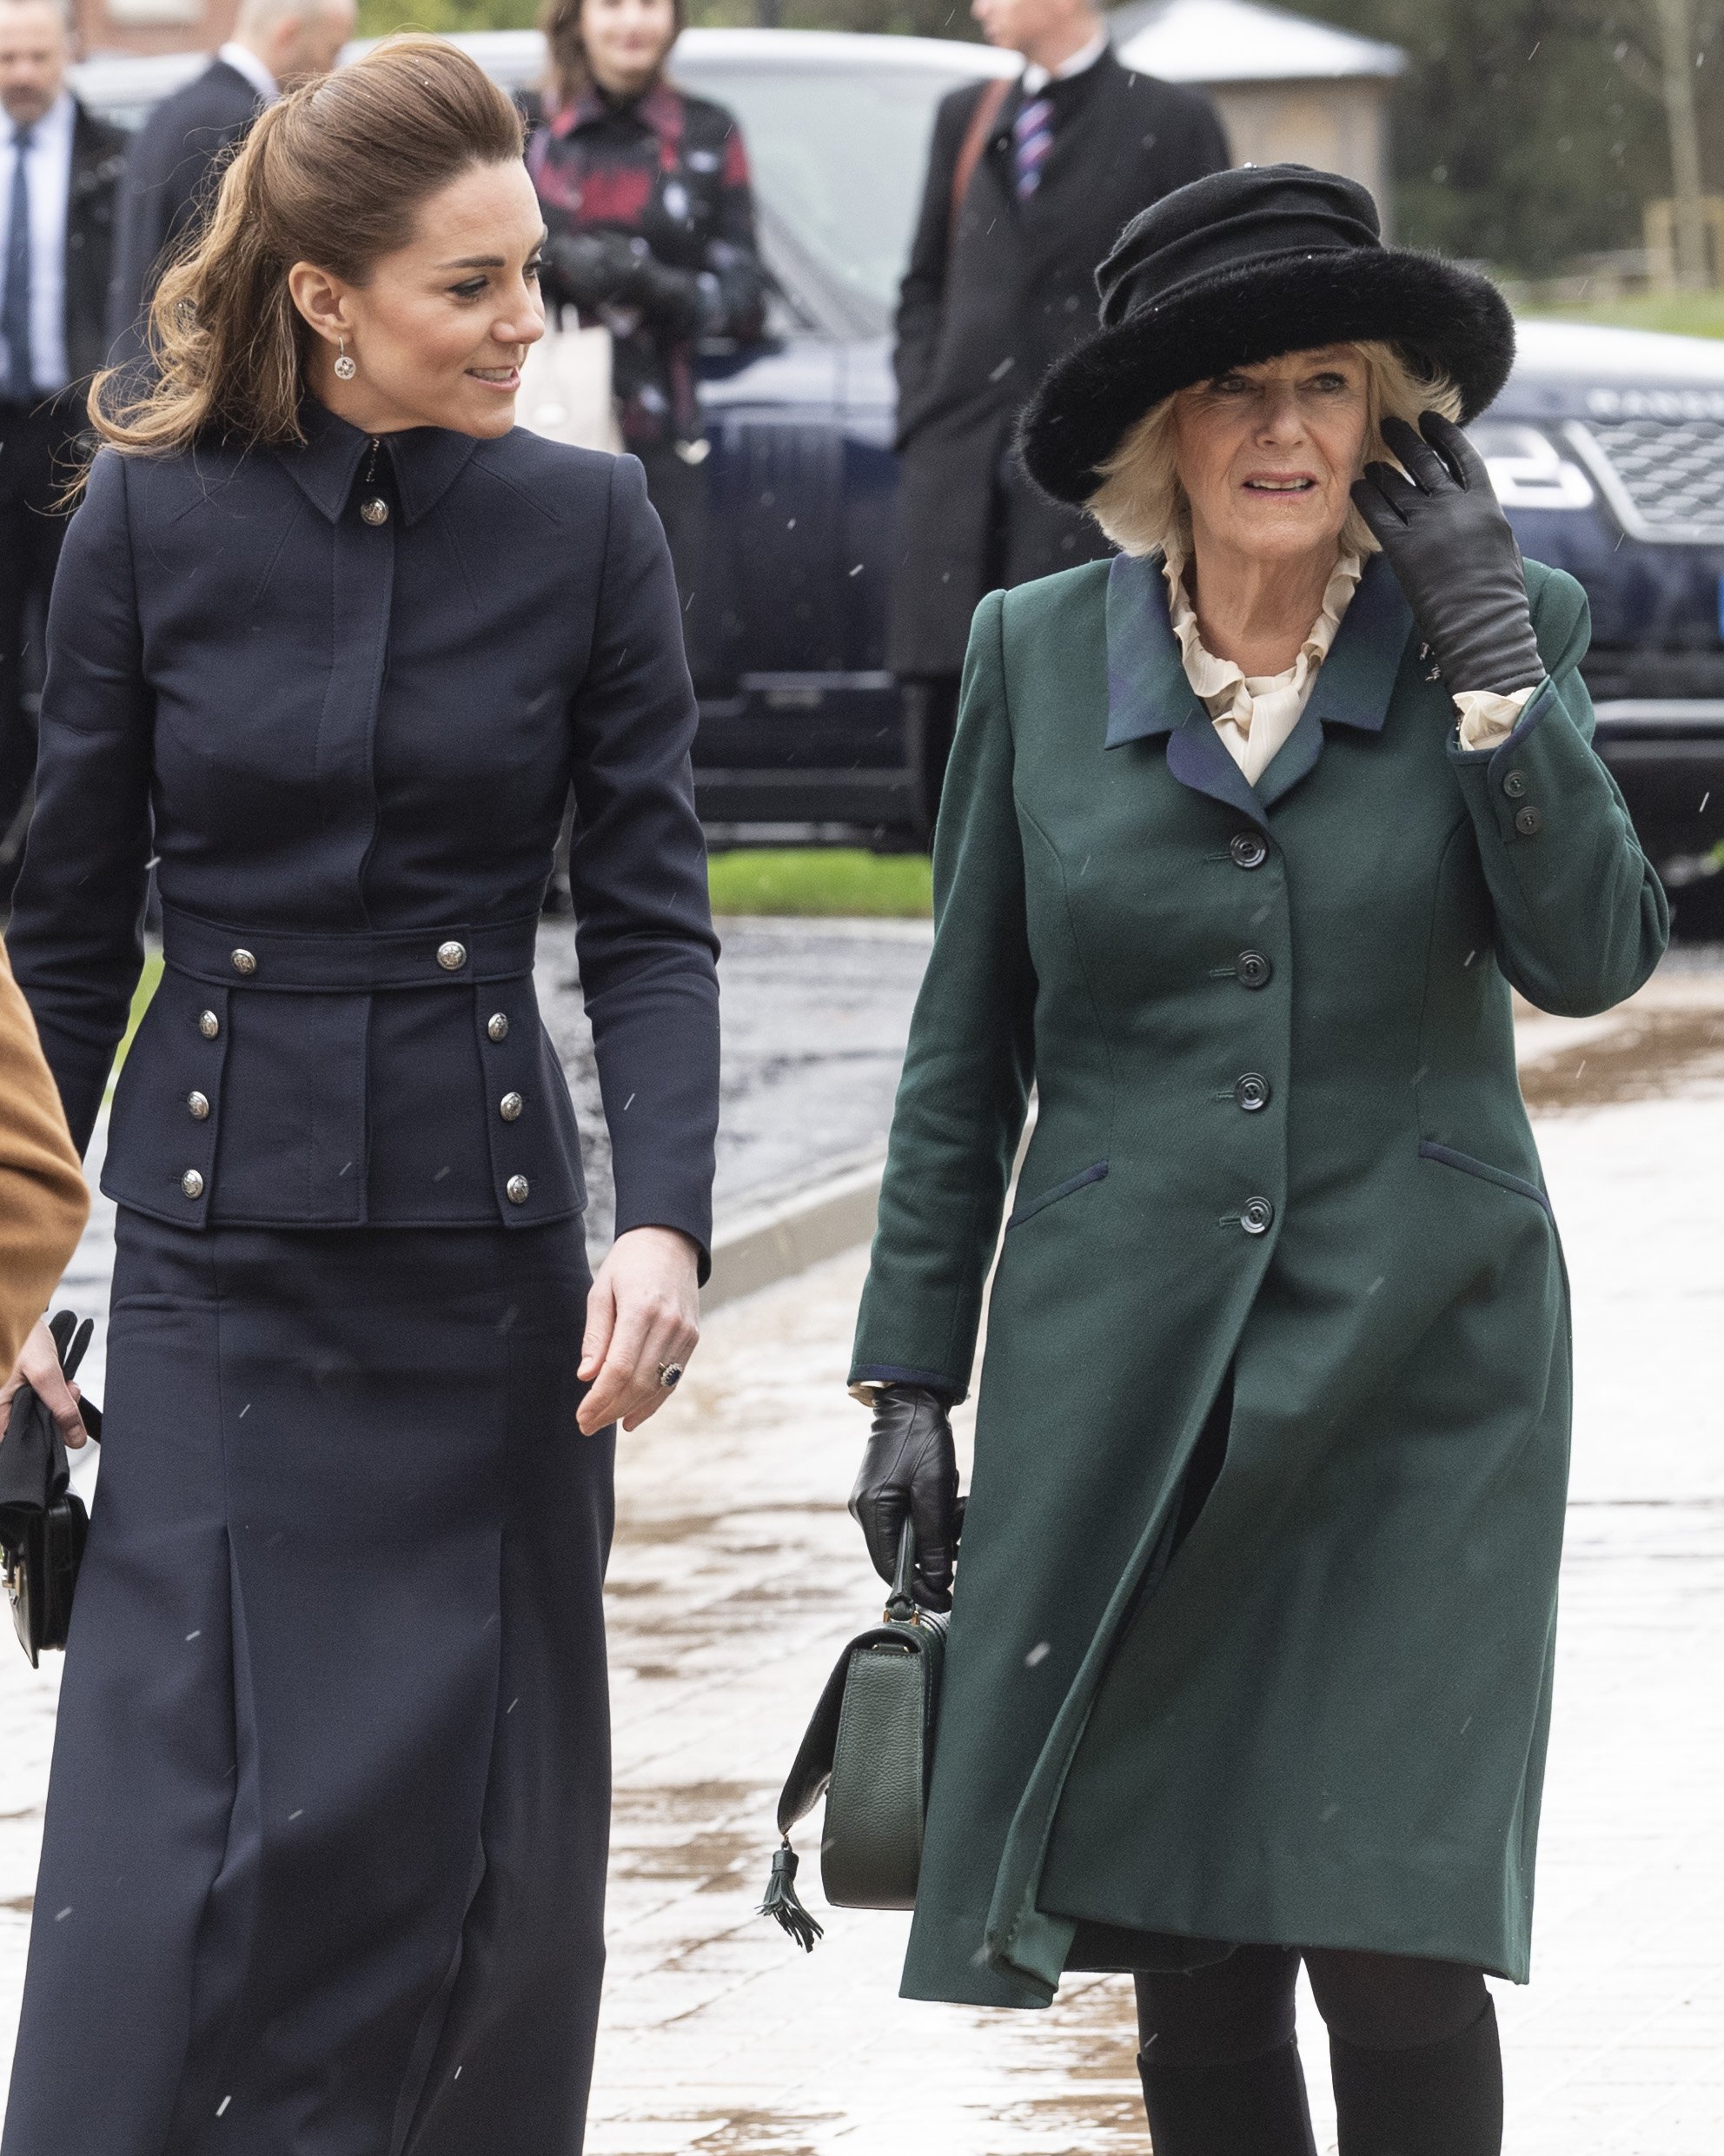 Camilla Duchess of Cornwall and Kate Middleton in Loughborough 2020. | Source: Getty Images